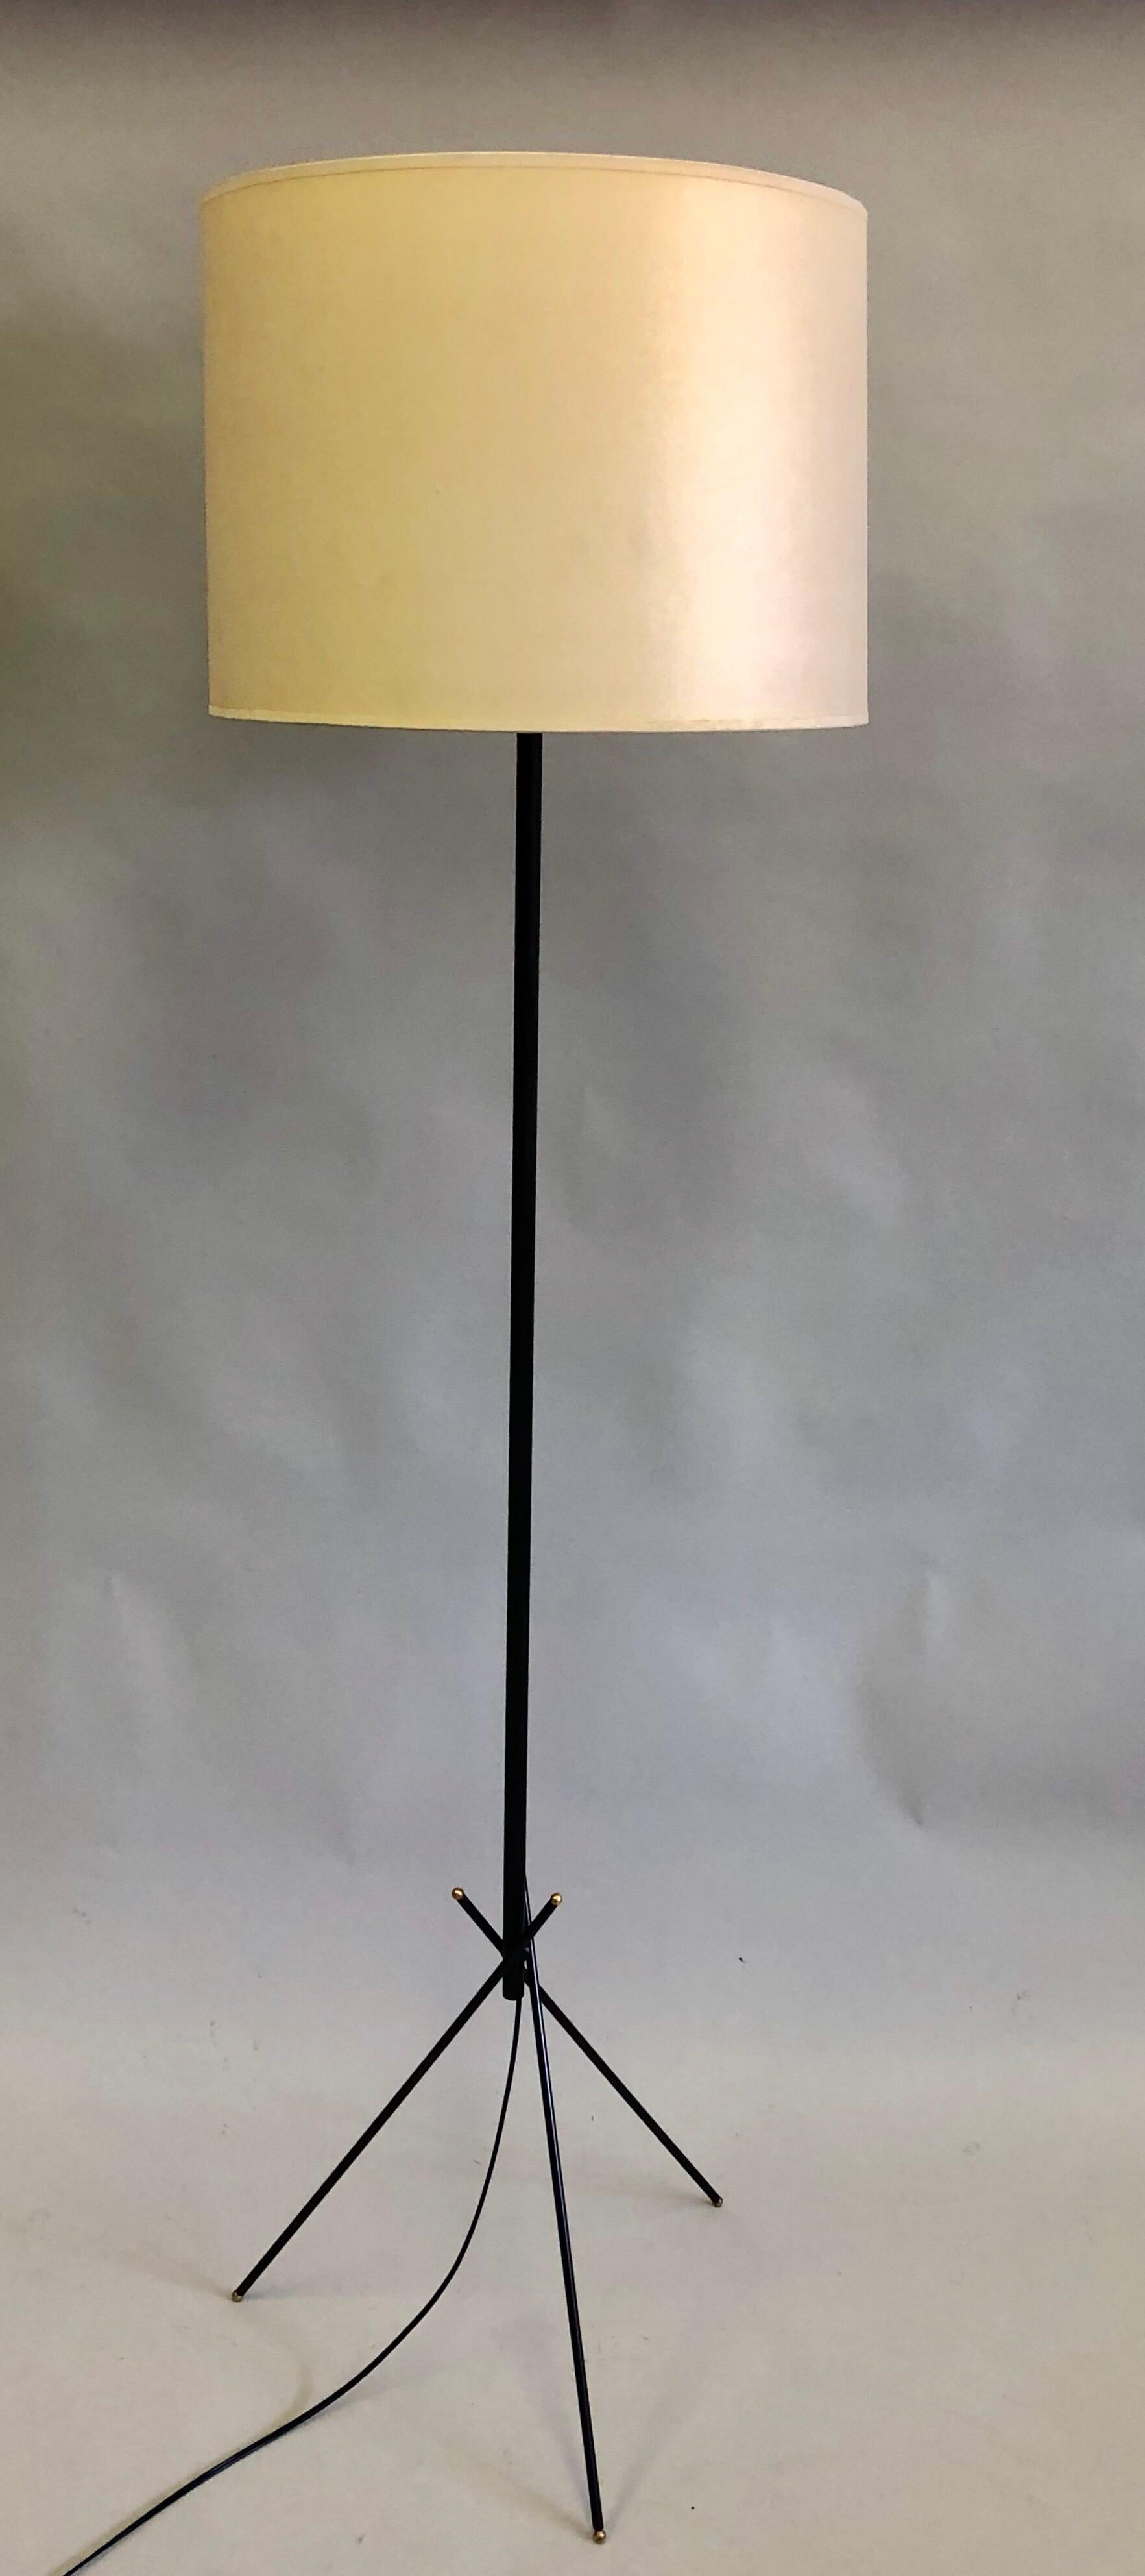 Pair of French Mid-Century Modern Wrought Iron Floor Lamps, Disderot In Good Condition For Sale In New York, NY